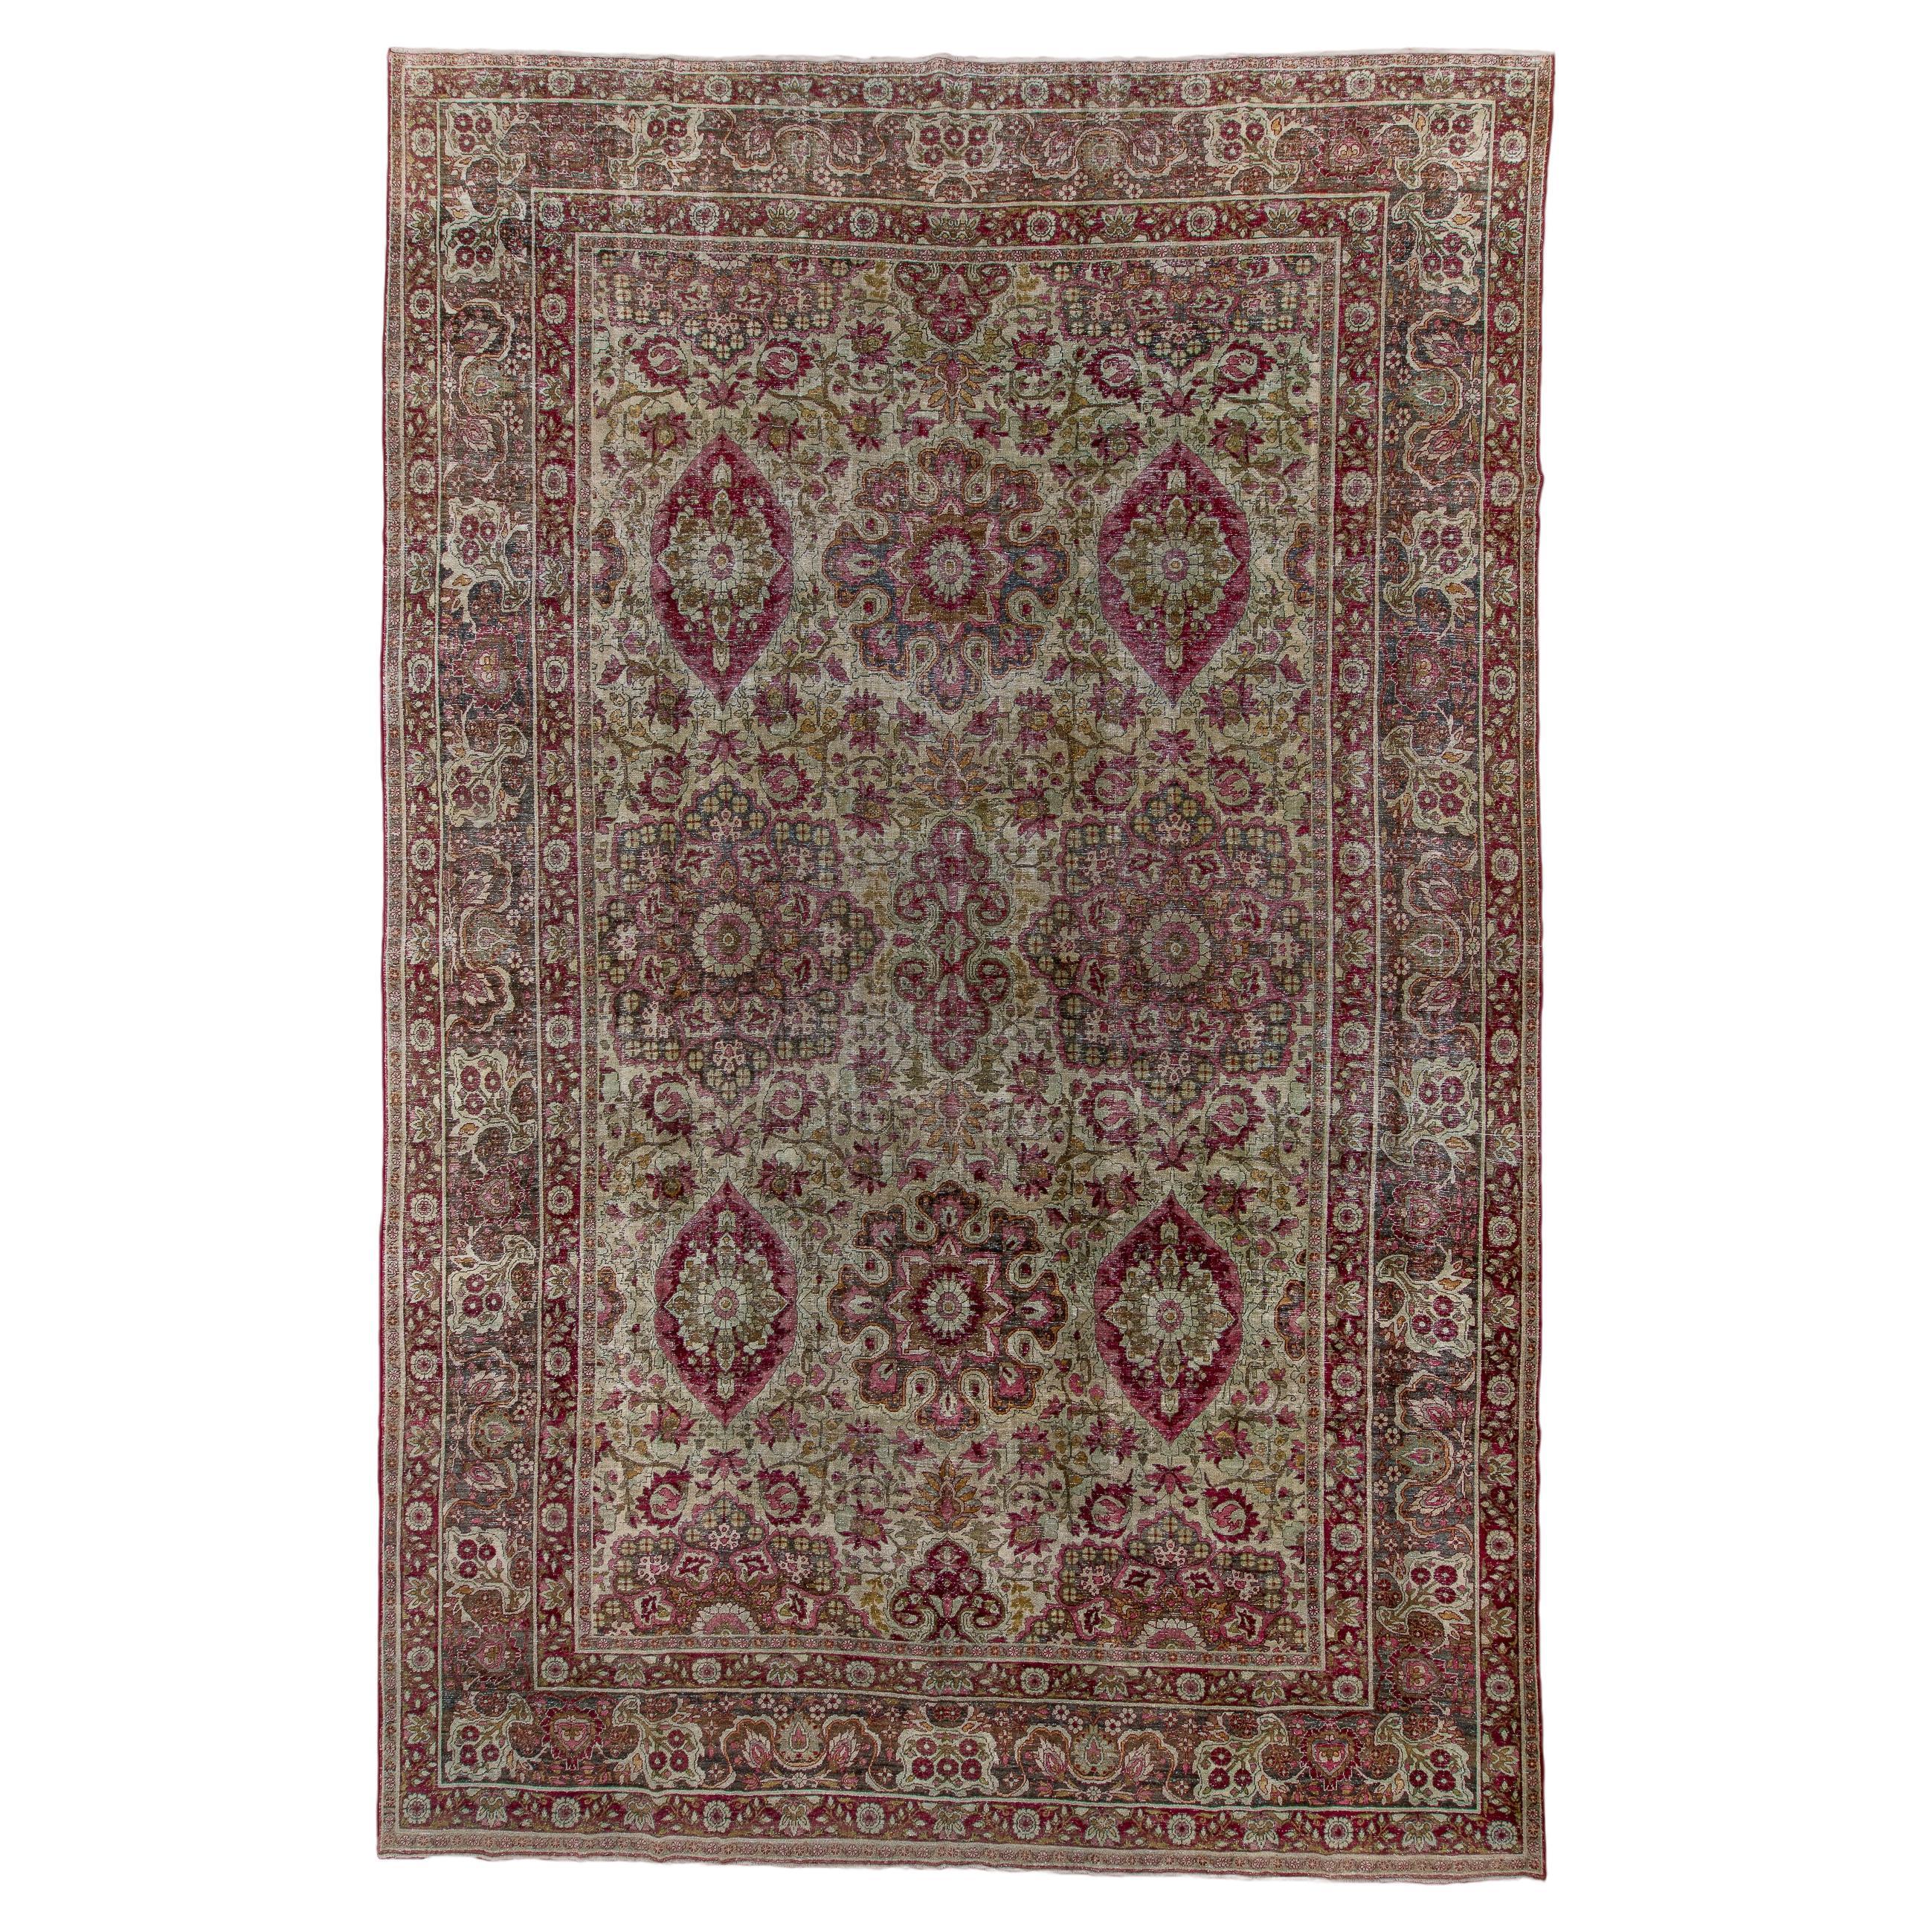 Antique Kerman Rug with Cream Field and Red Floral Design